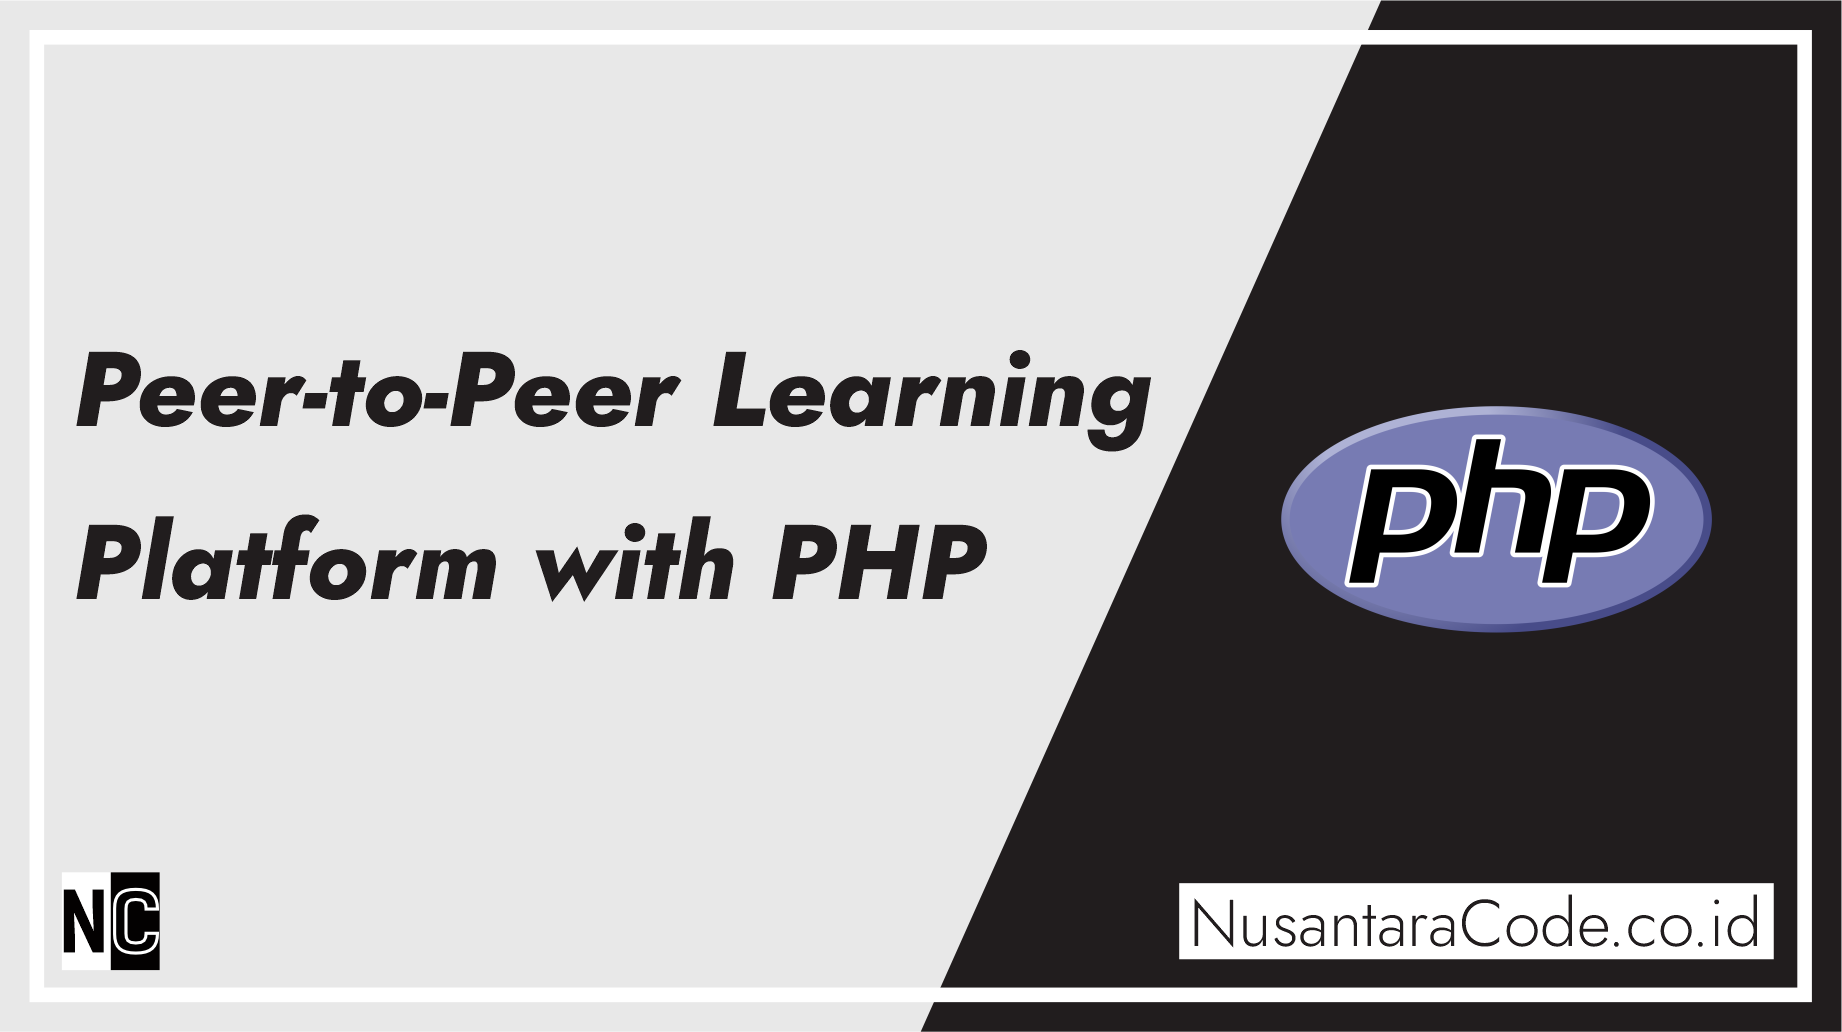 Building a Peer-to-Peer Learning Platform with PHP